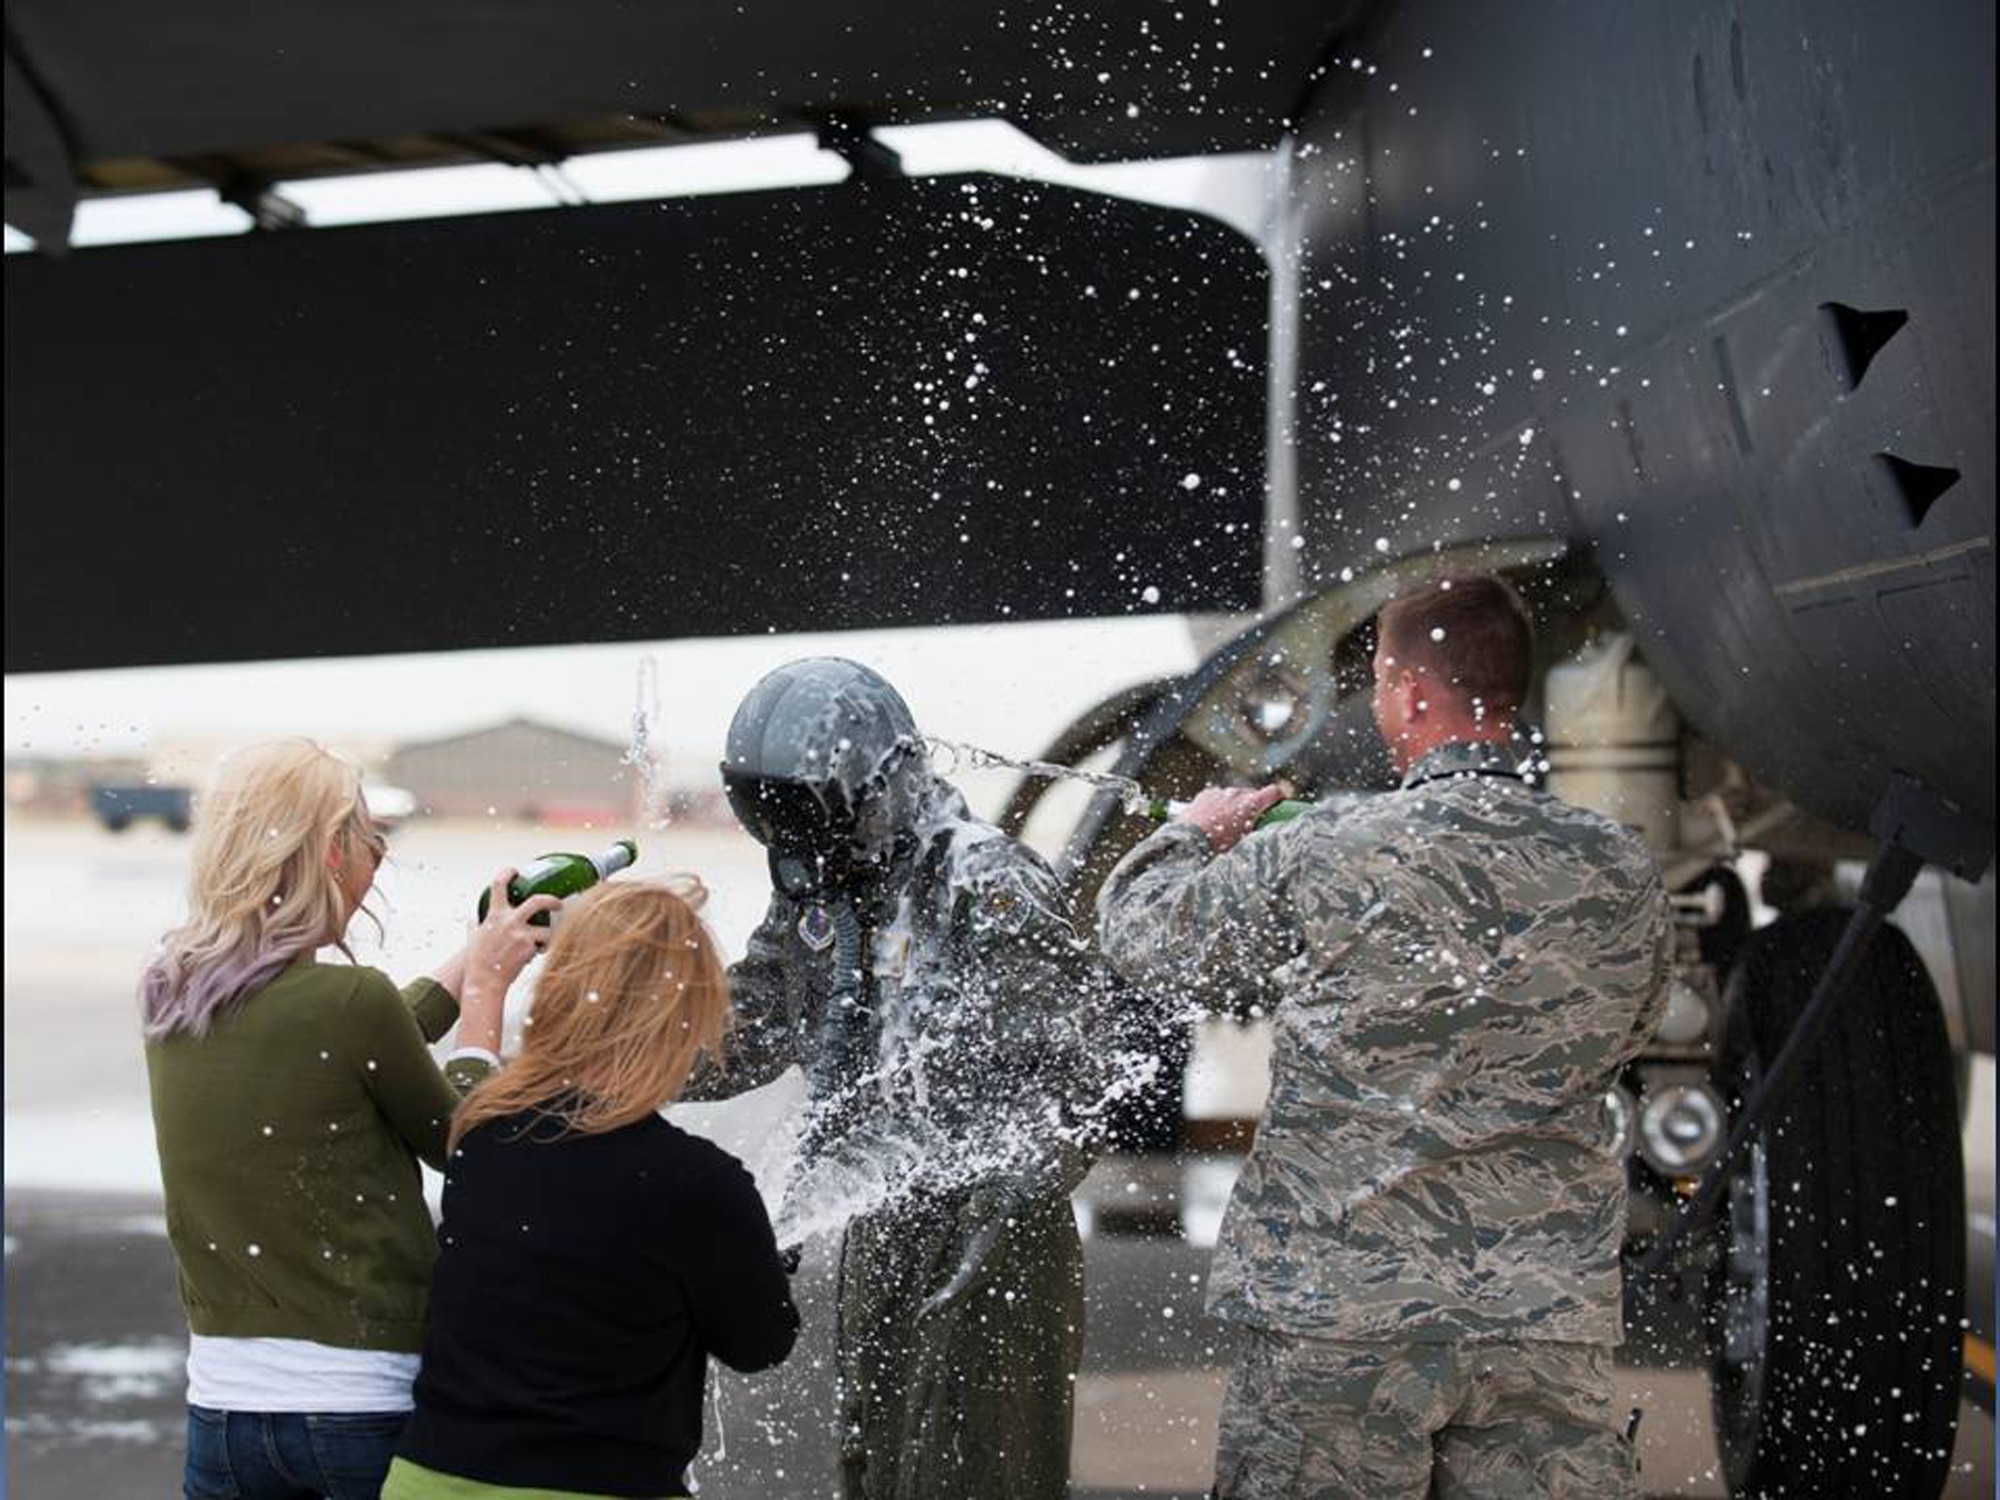 Col. Max B. Mitchell gets dosed with water and celebration by his family and Col. Alex Mezynski, commander of the 5th Bomb Wing, after Mitchell’s final flight in the B-52H Stratofortress, Oct. 8. Mitchell officially retired from the U.S. Air Force, Oct. 11, after 25 years of service with nearly 4,000 flying hours in the B-52 as a master navigator. (U.S Air Force photo/Capt. Jeffre Nagan)